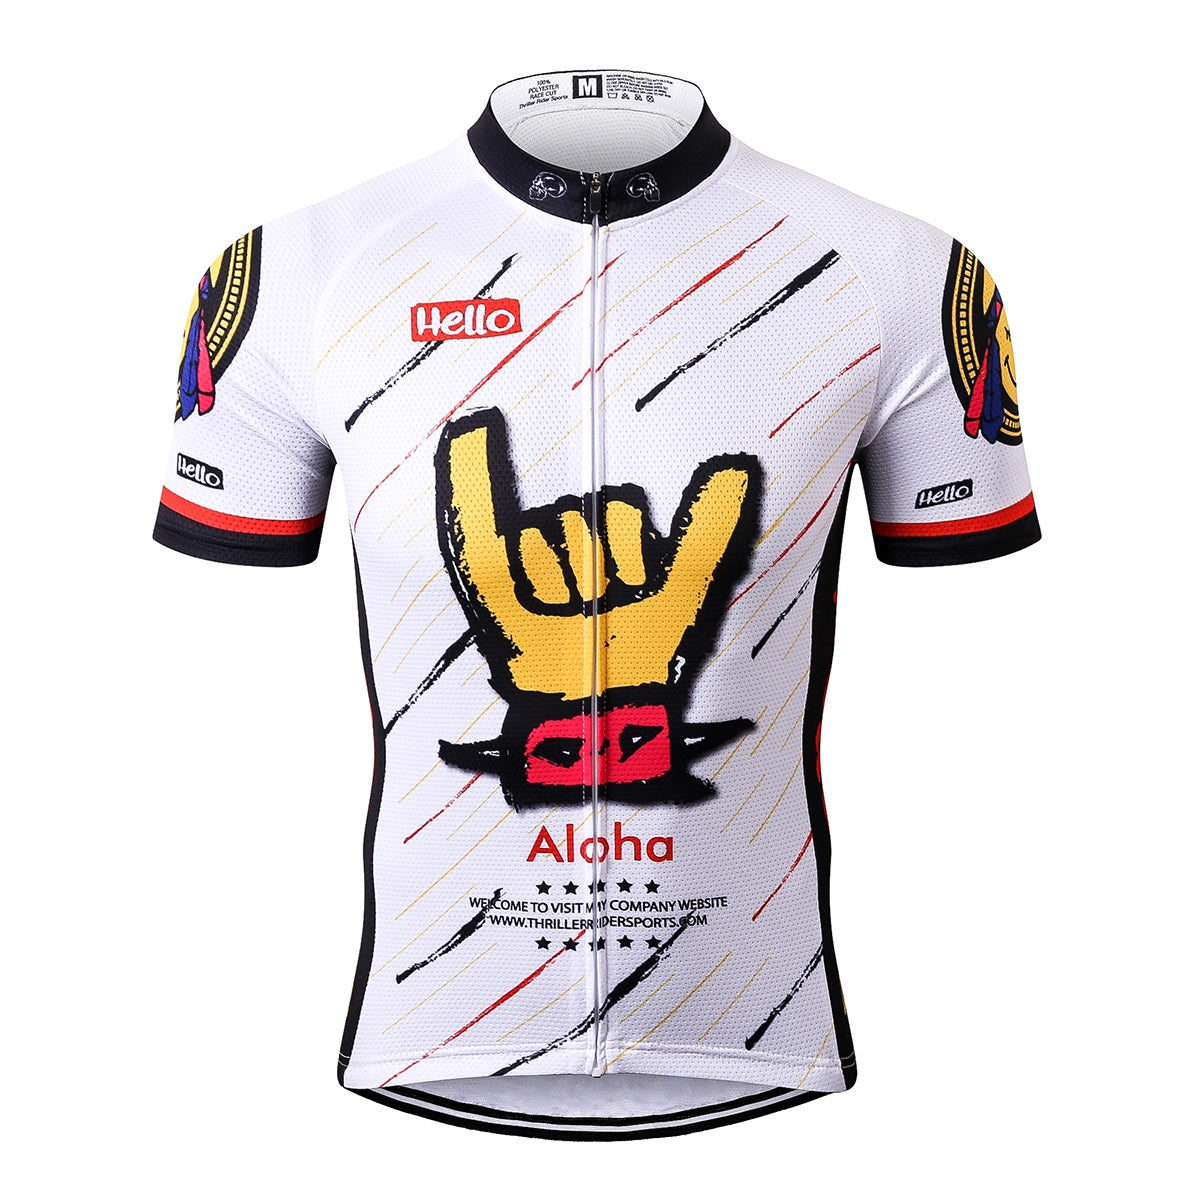 legendary division men Cycling Clothing Ropa Ciclismo Short Sleeve